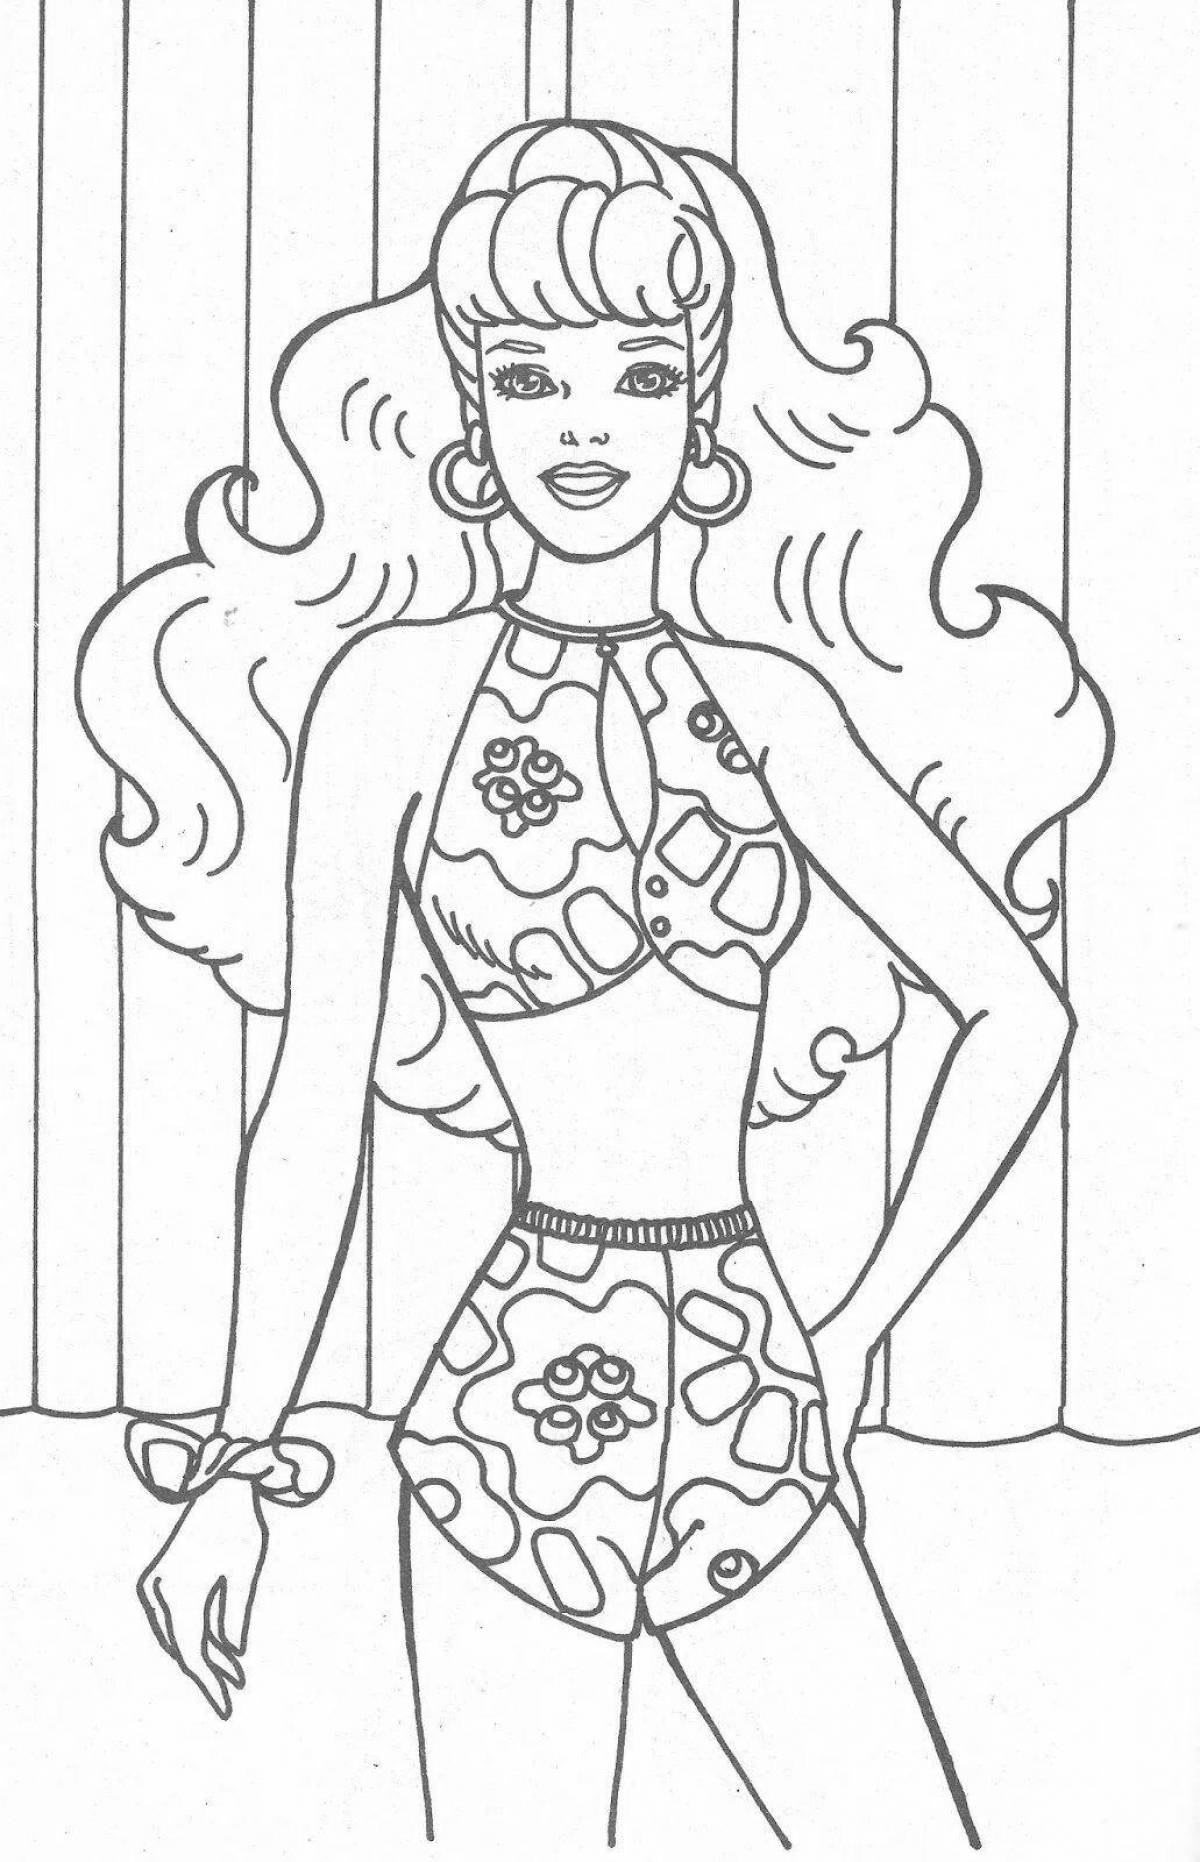 90's funny barbie coloring book